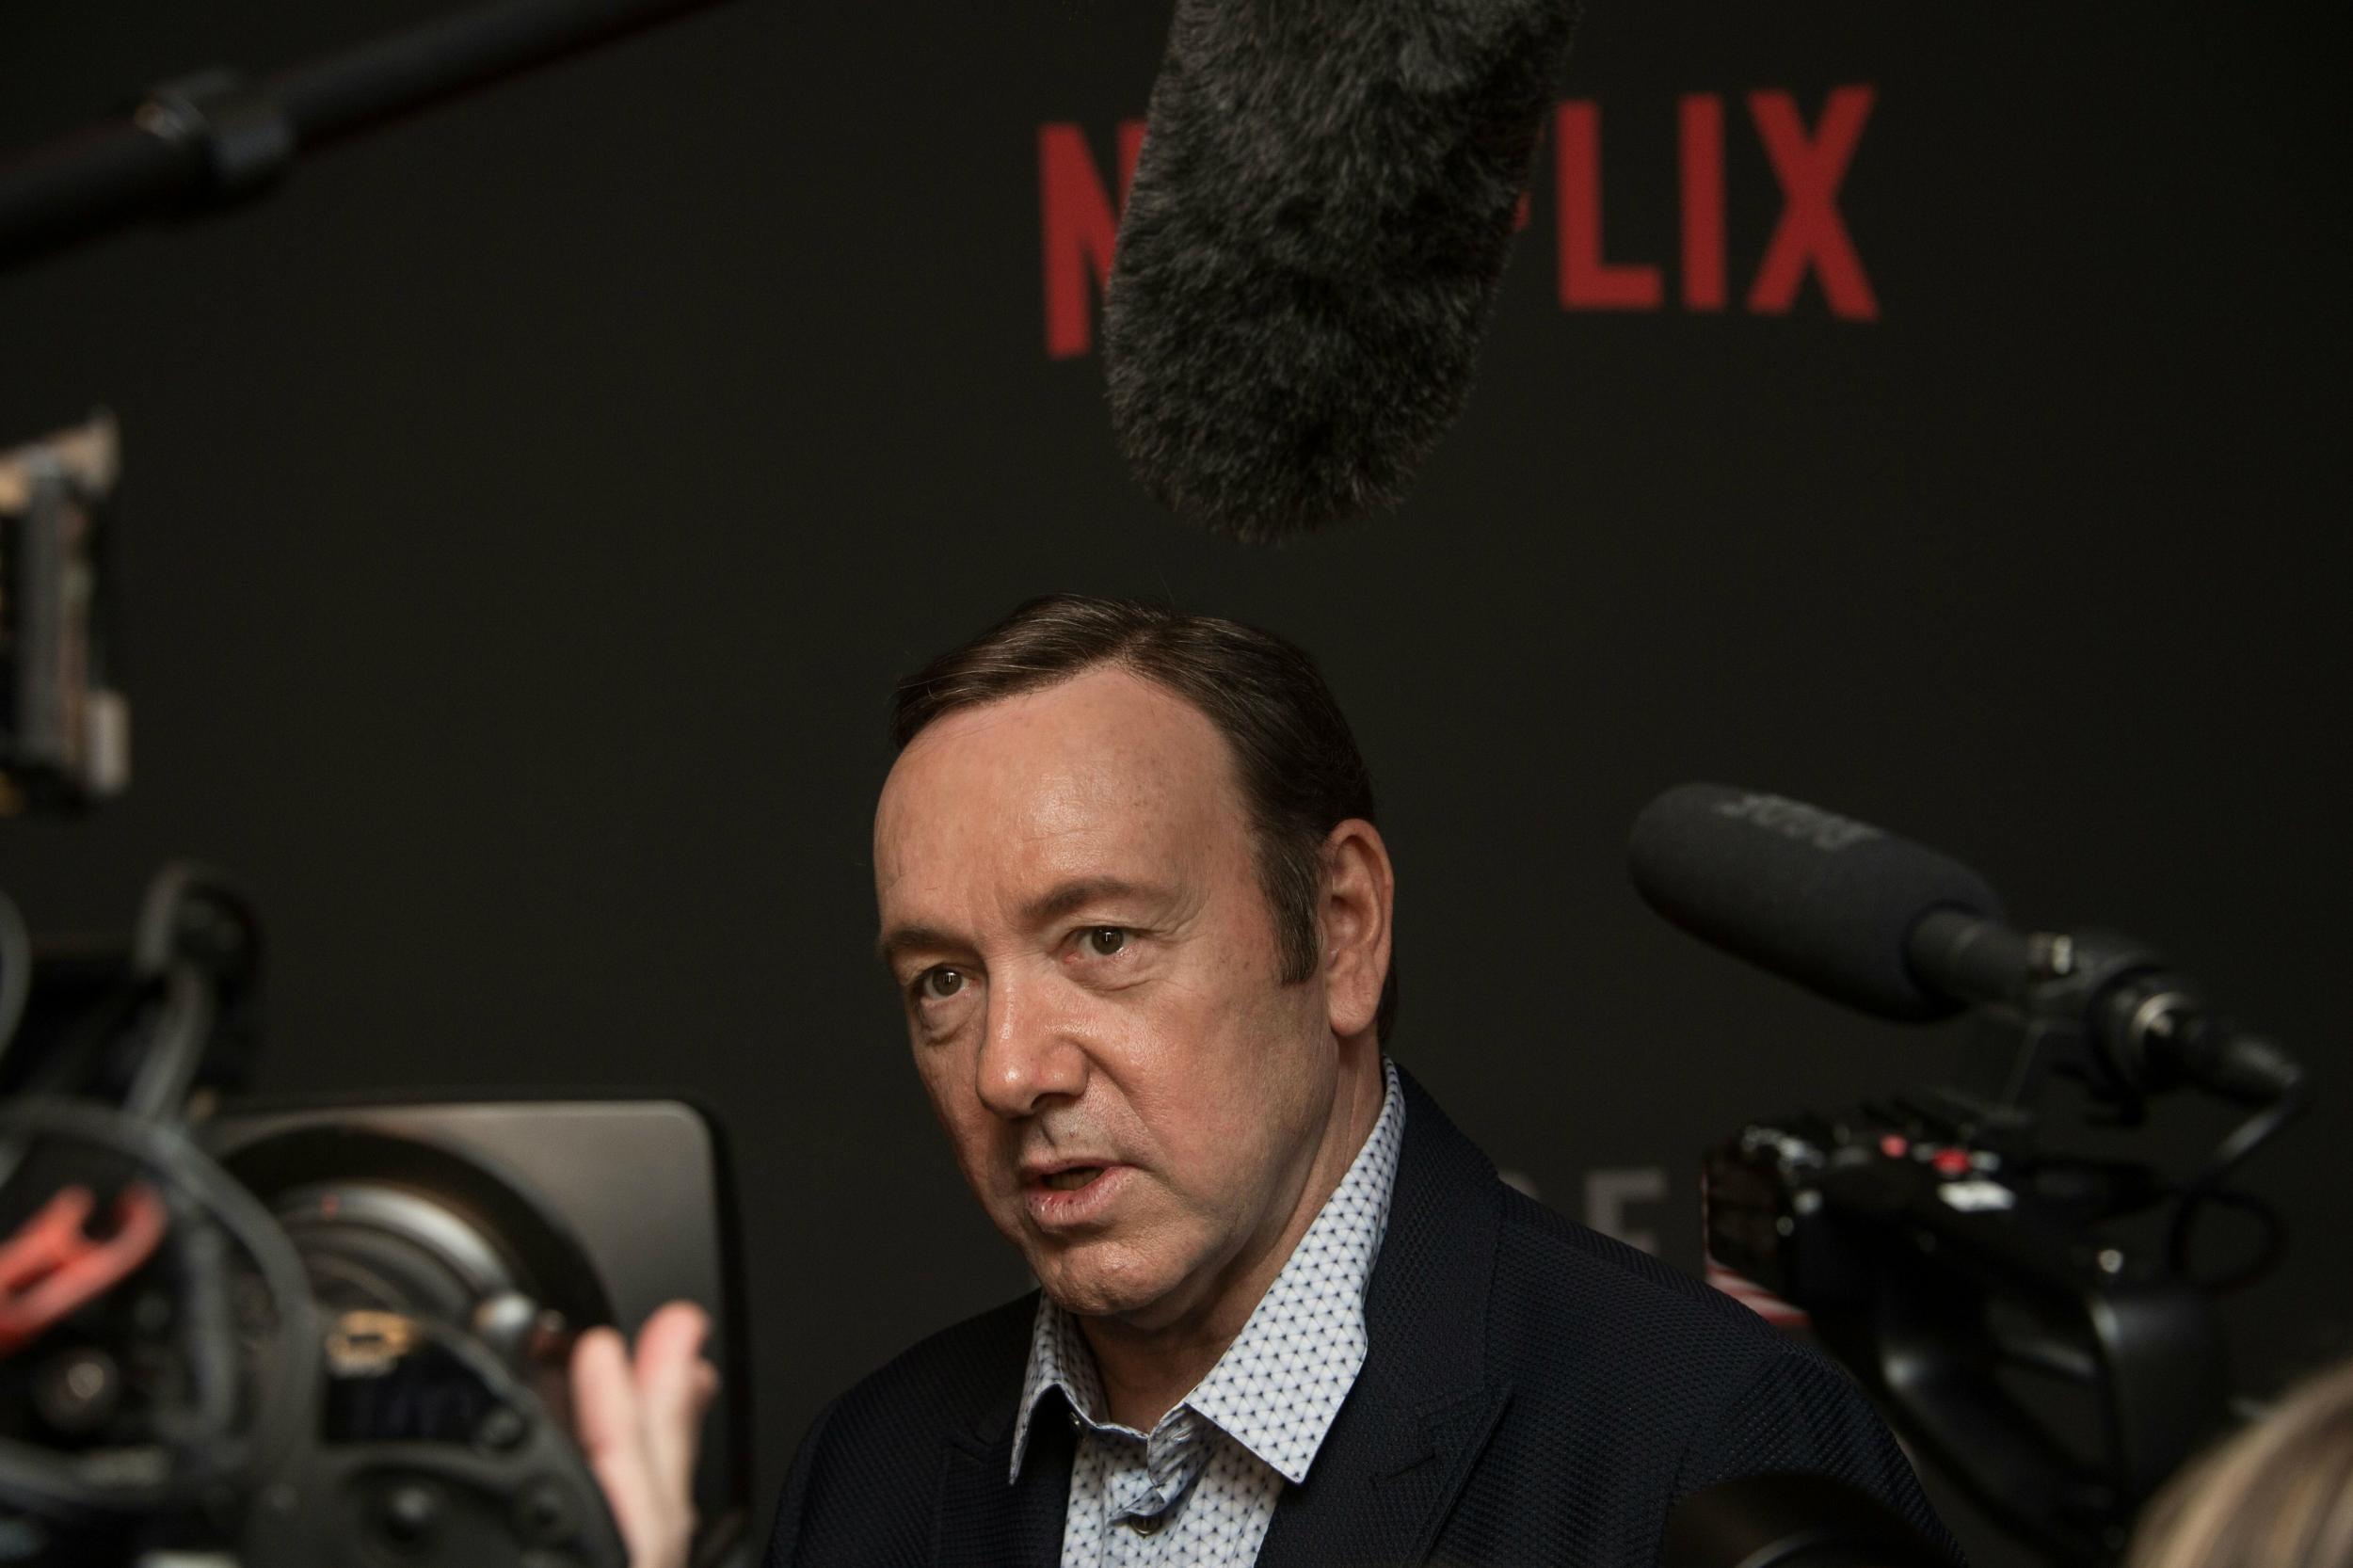 Spacey's brother said he created a 'fake life' to hide his 'dark side'